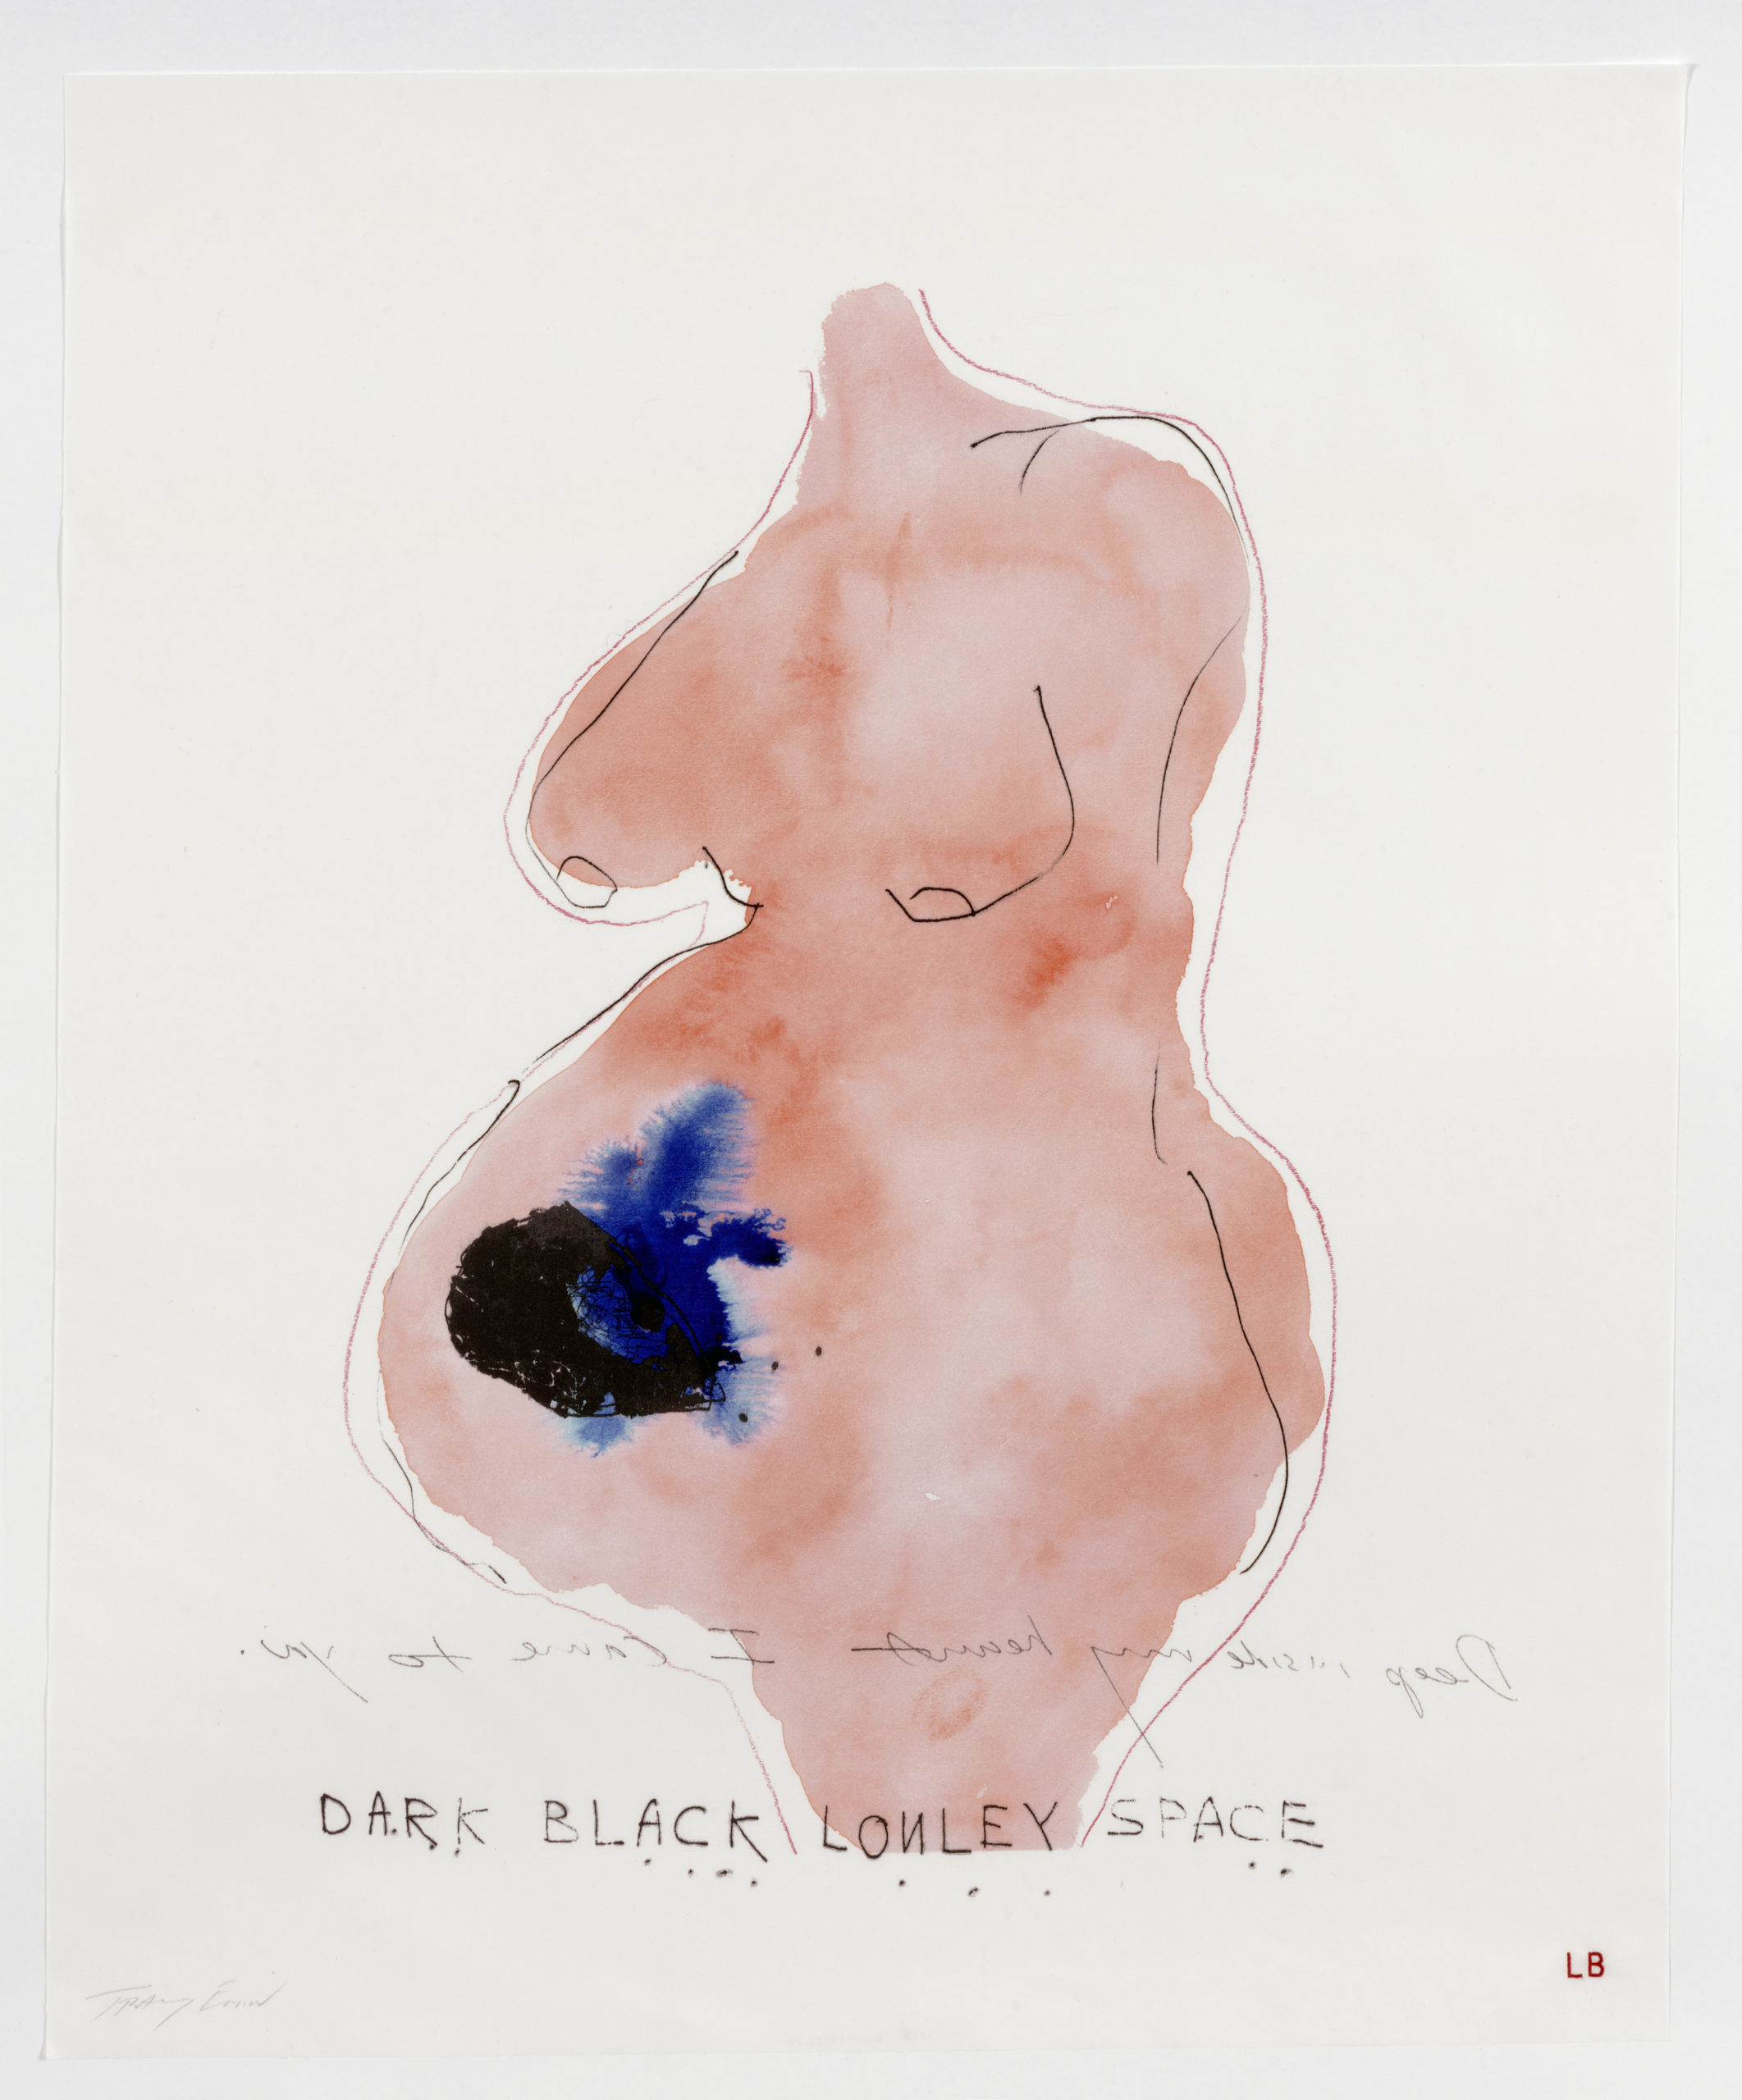 Tracey Emin, Deep Inside My Heart, 2009-10. Archival dyes printed on cloth/ 76.2 x 61 cm Â© Tracey Emin. All rights reserved, DACS/Artimage 2020